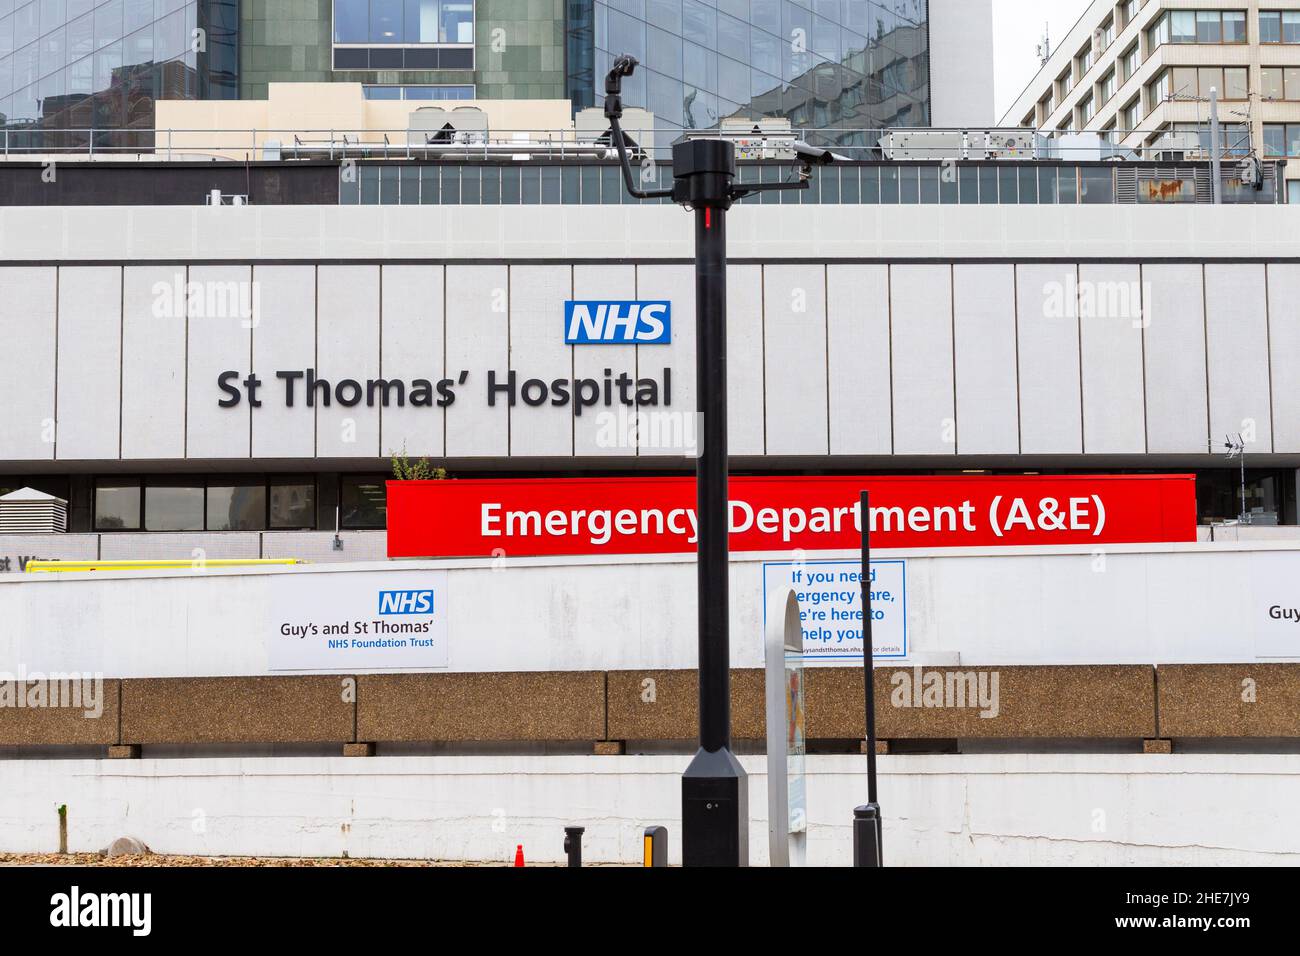 St Thomas hospital and emergency department a & e signs, london, uk Stock Photo